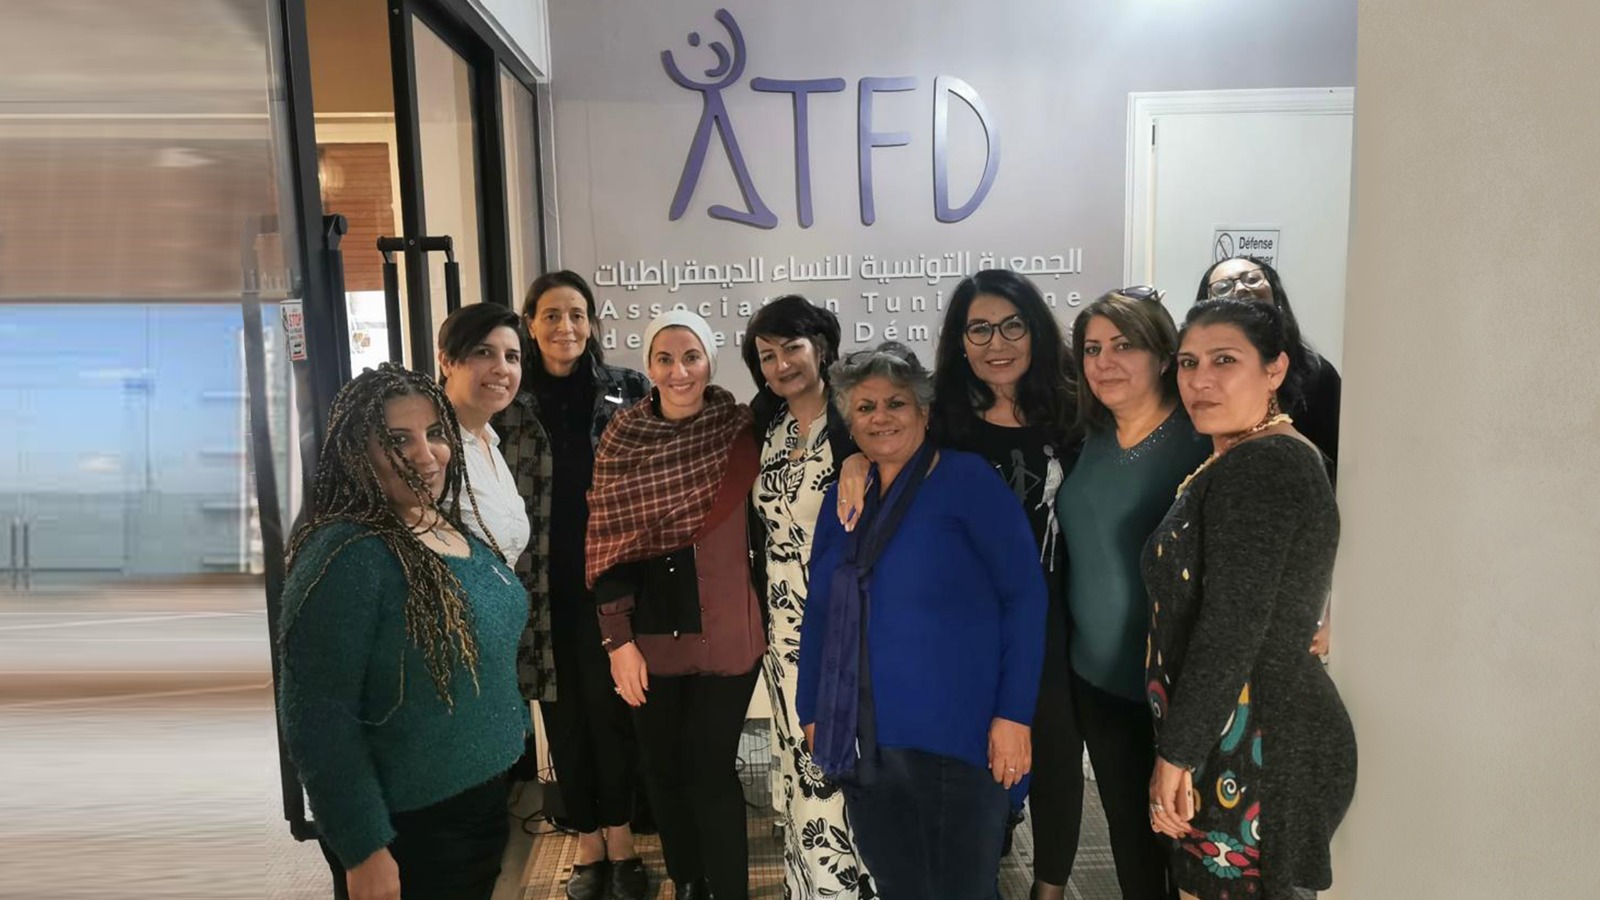 The visit of the Syrian women’s political movement to Tunisia as part of the Women decide Program